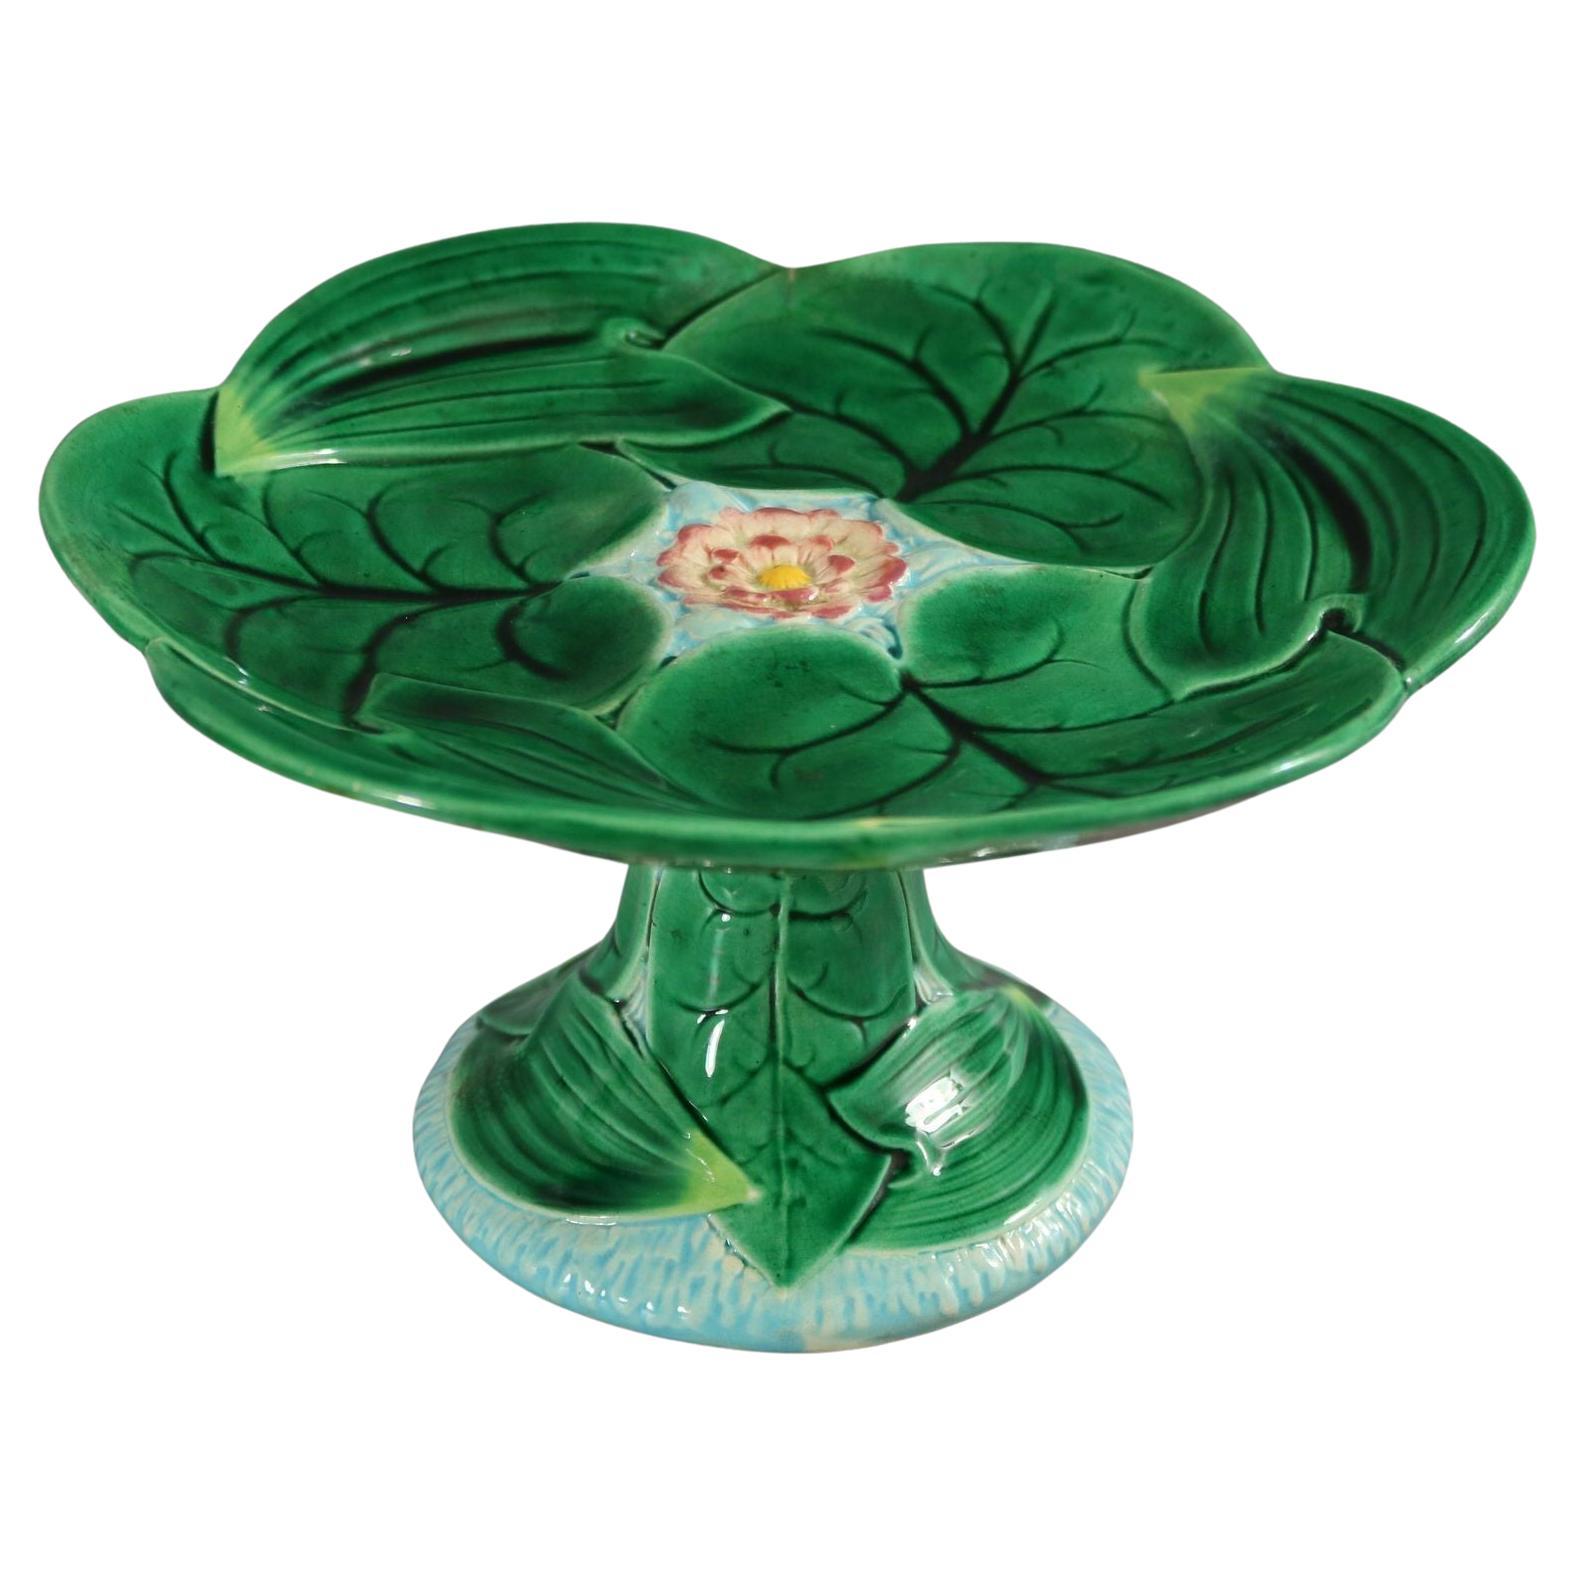 George Jones Majolica Lily Compote For Sale